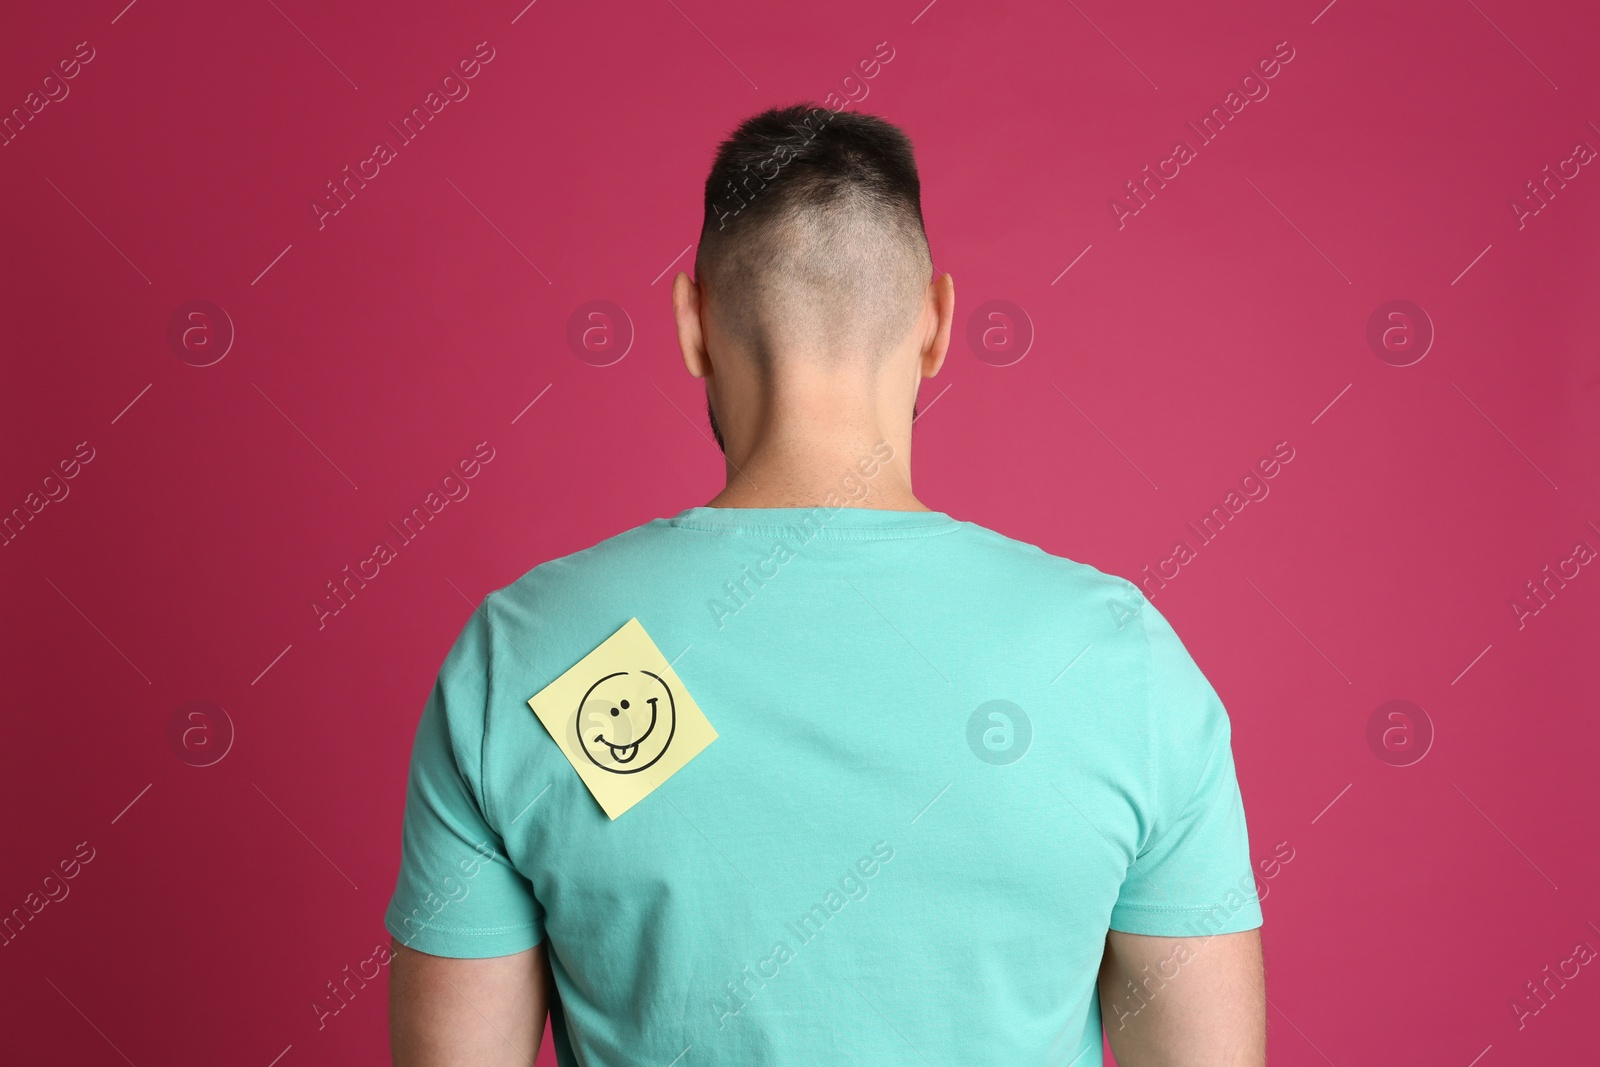 Photo of Man with smiling face sticker on back against pink background. April fool's day